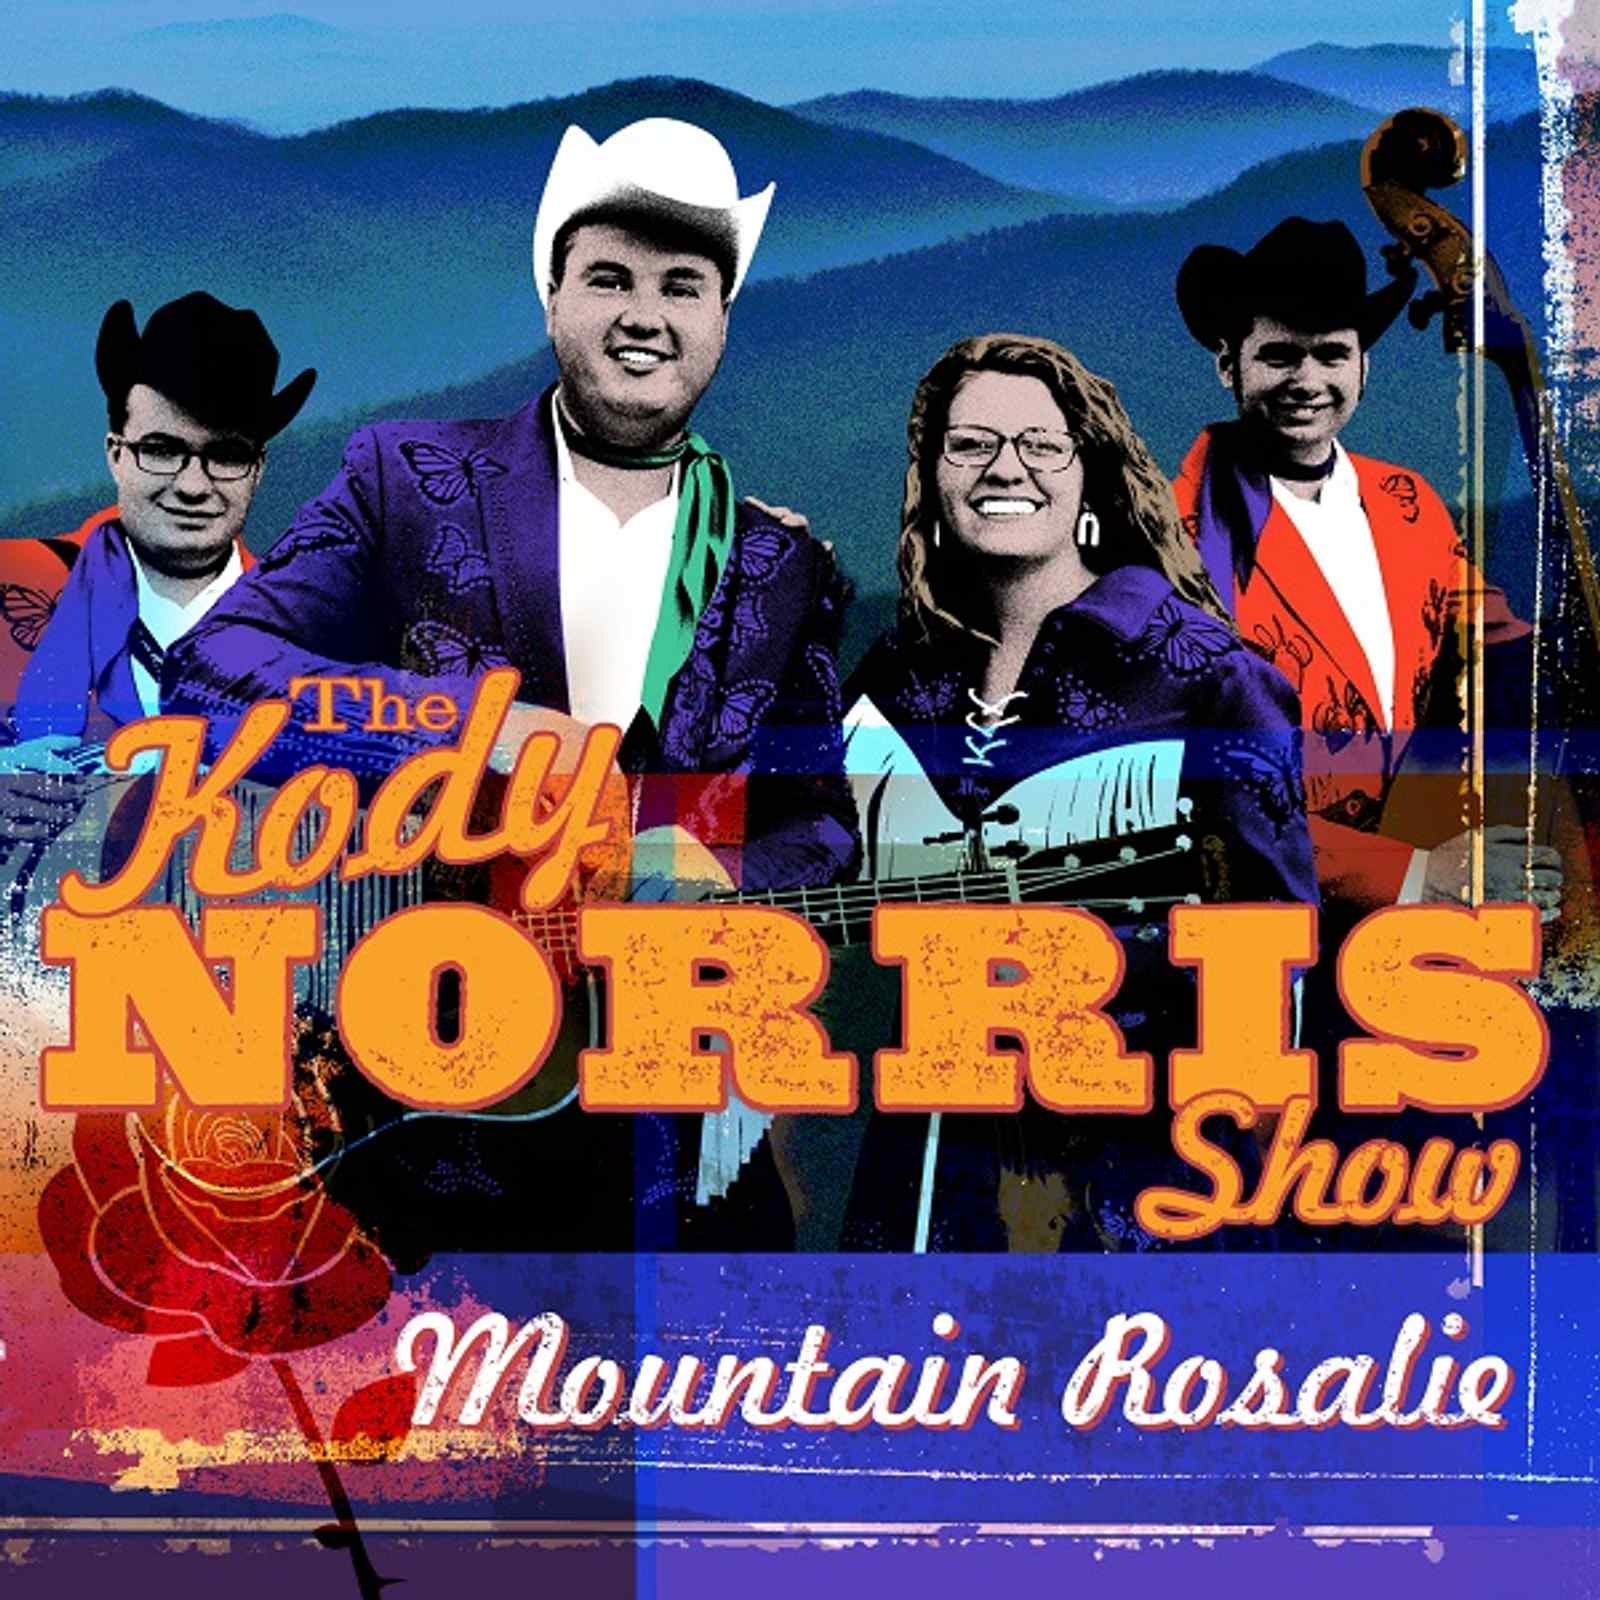 A Conversation with Kody Norris of the Award-Winning Country & Bluegrass Group, The Kody Norris Show